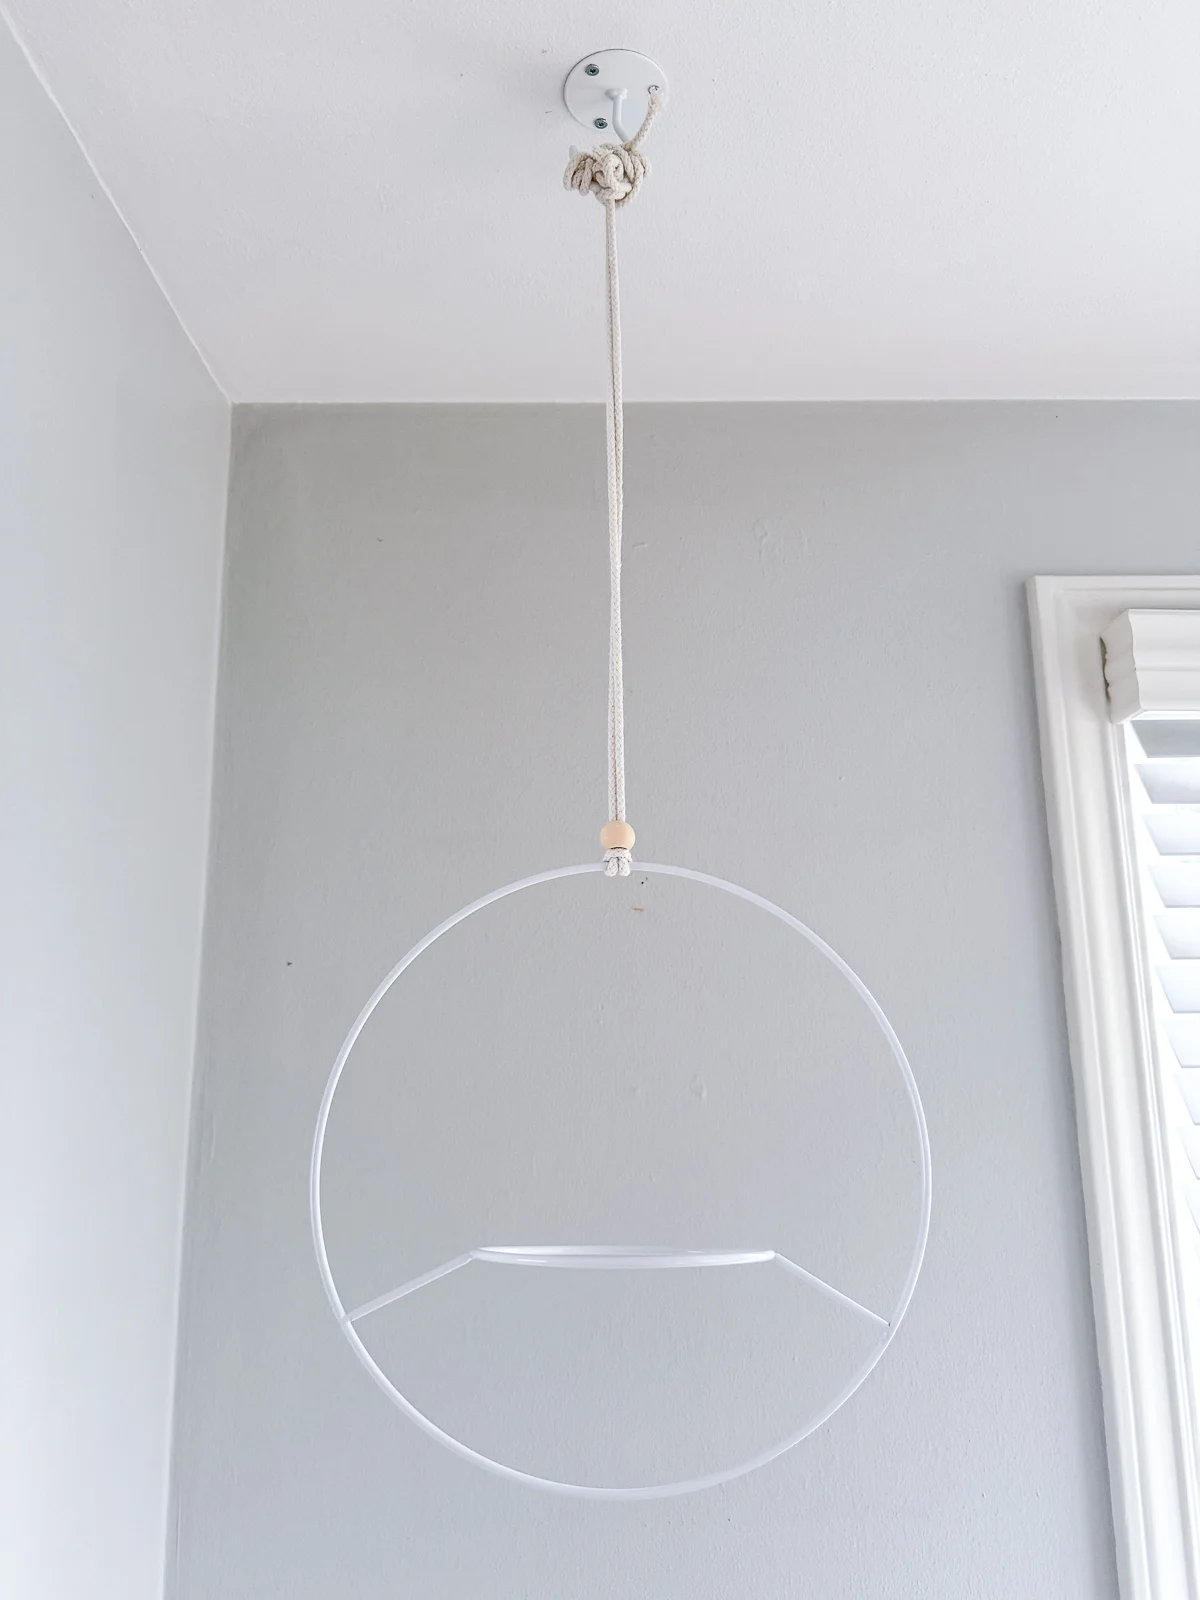 hanging planter from a ceiling hook